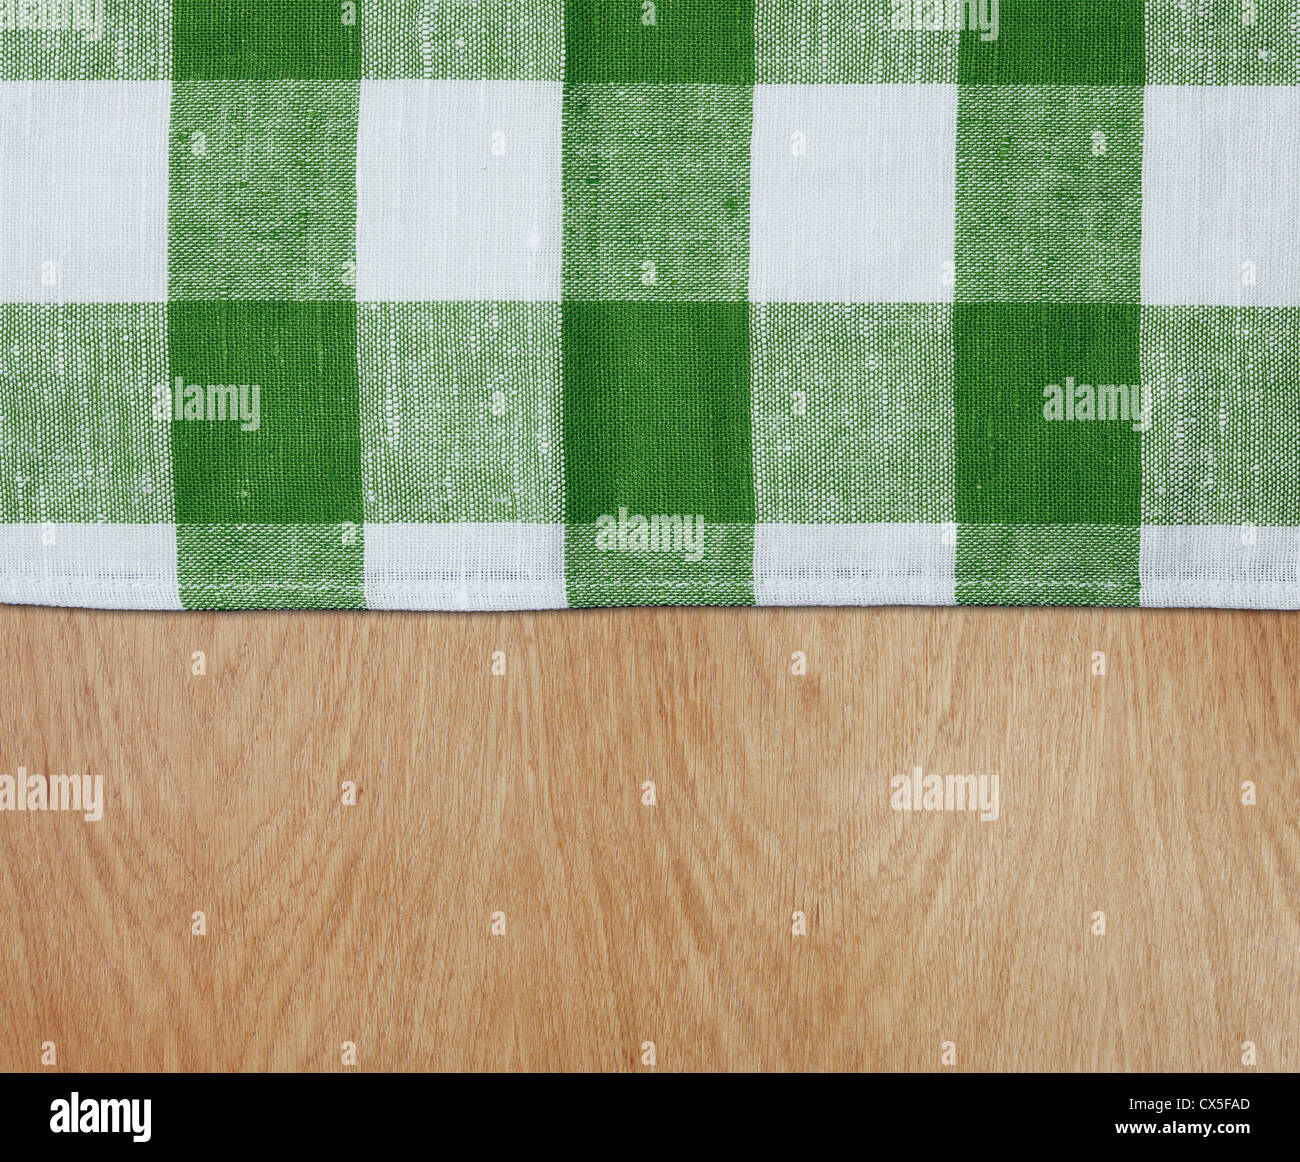 wooden kitchen table with green gingham tablecloth Stock Photo